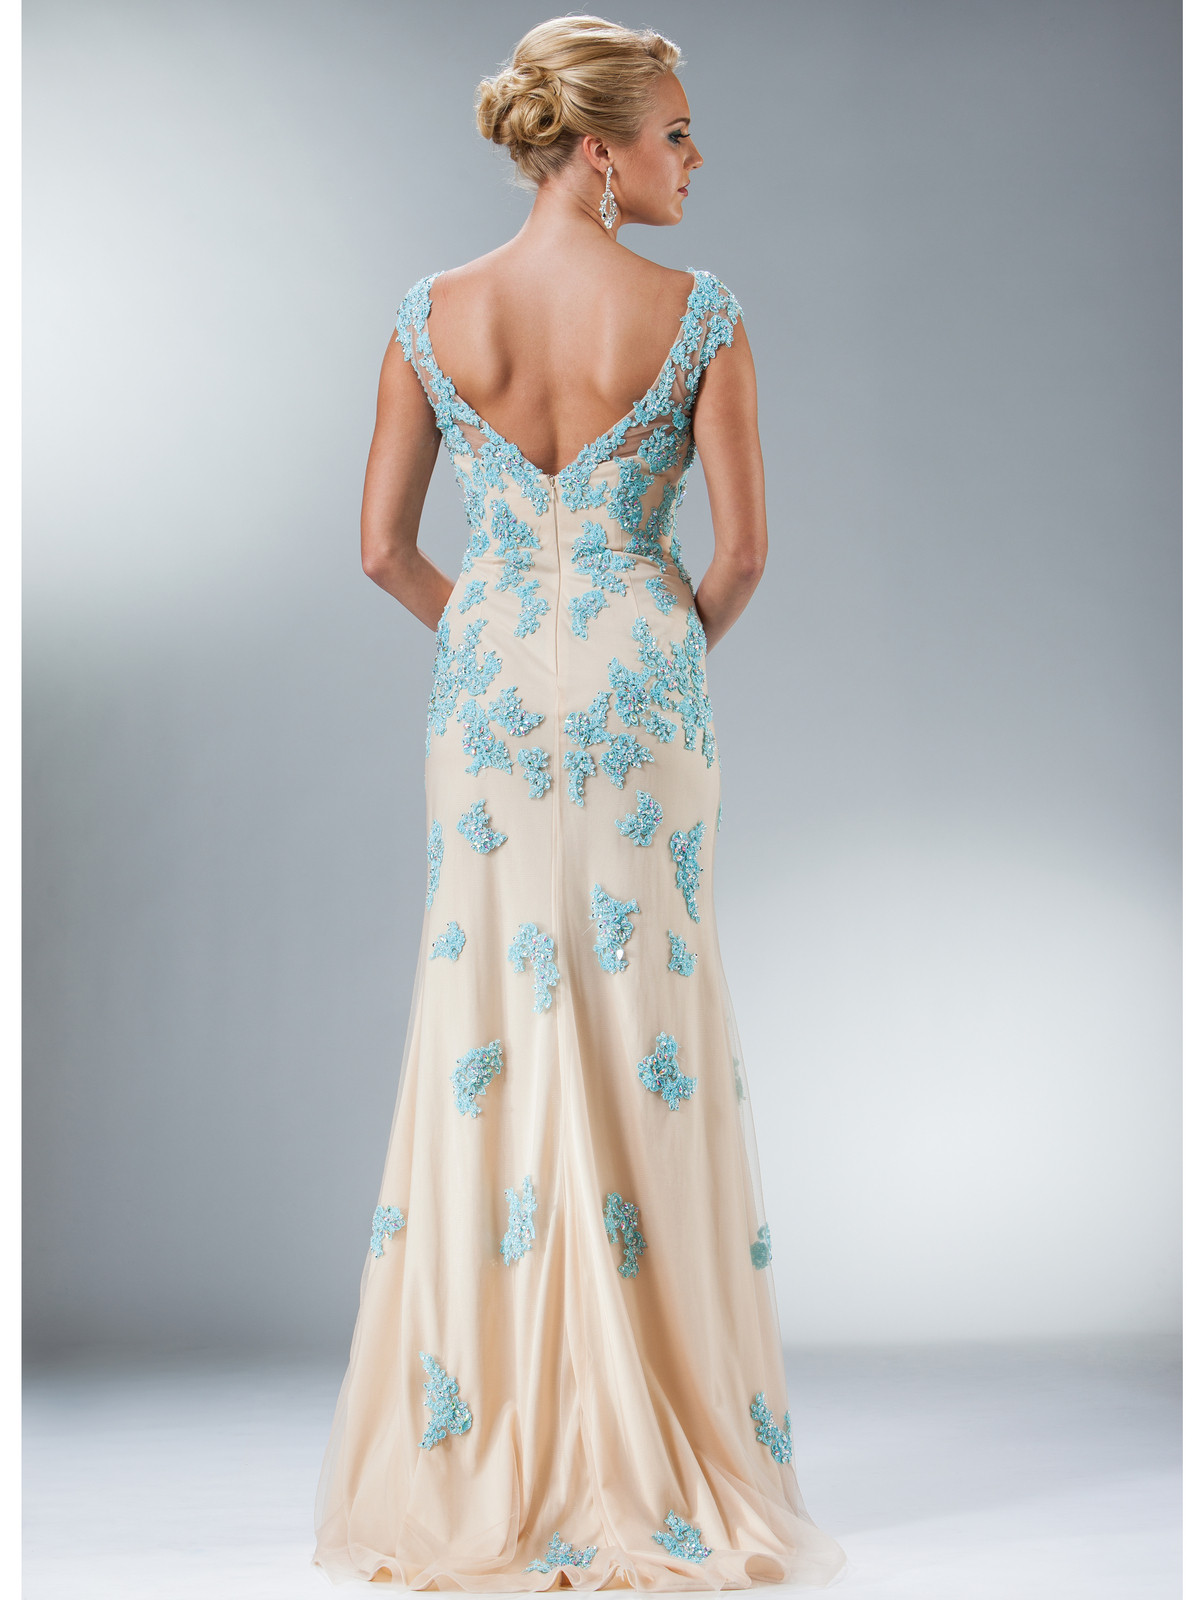 Floral Inspired Evening Gown - Sung Boutique L.A.